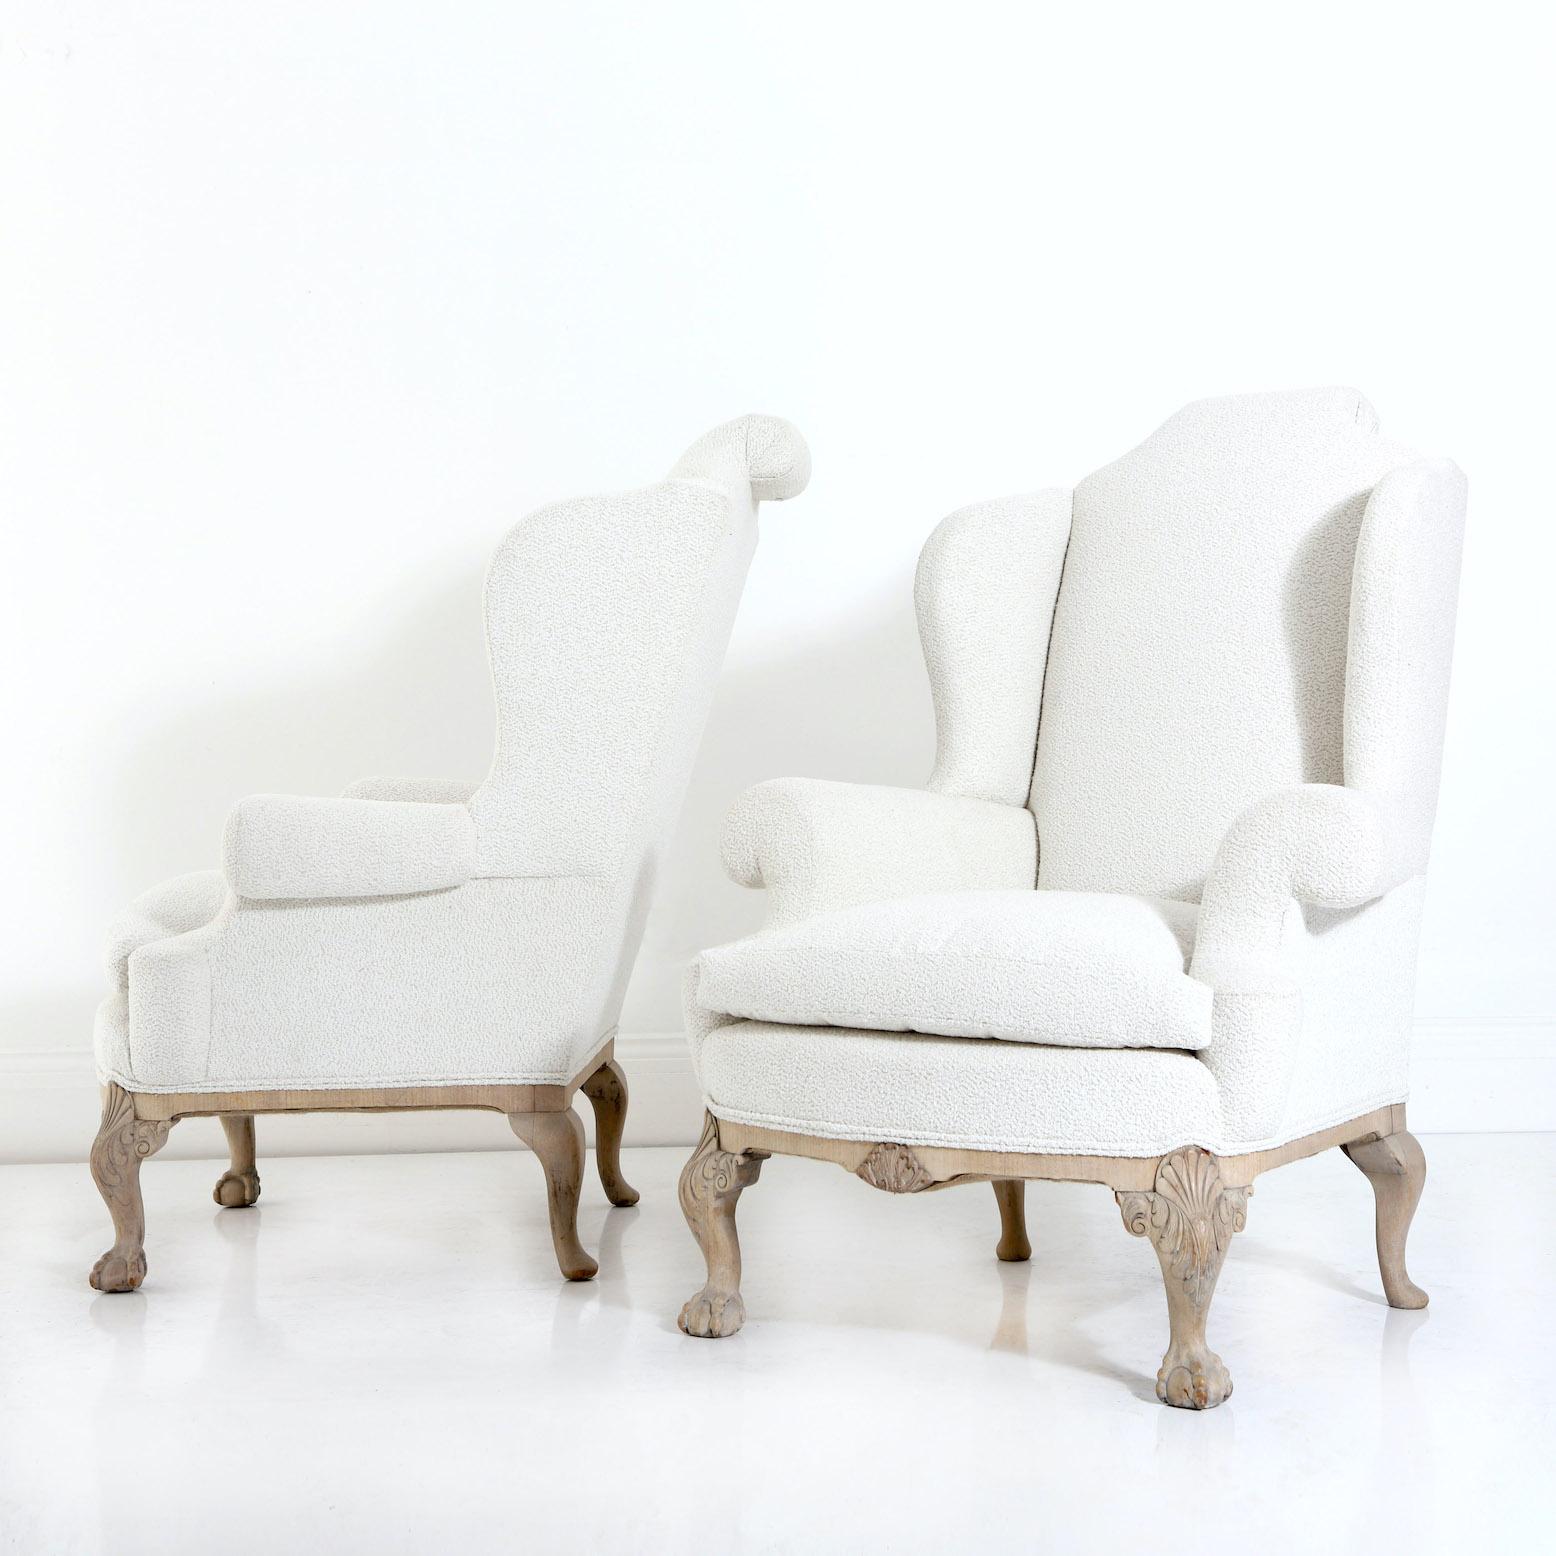 Vagabond Antiques presents a pair of english wing back armchairs

England, Circa 1920

” A classic pair of Queen Anne style wing armchairs reinvented in a soft, clean boucle fabric, with a soft contrast to the now bleach walnut frames, big